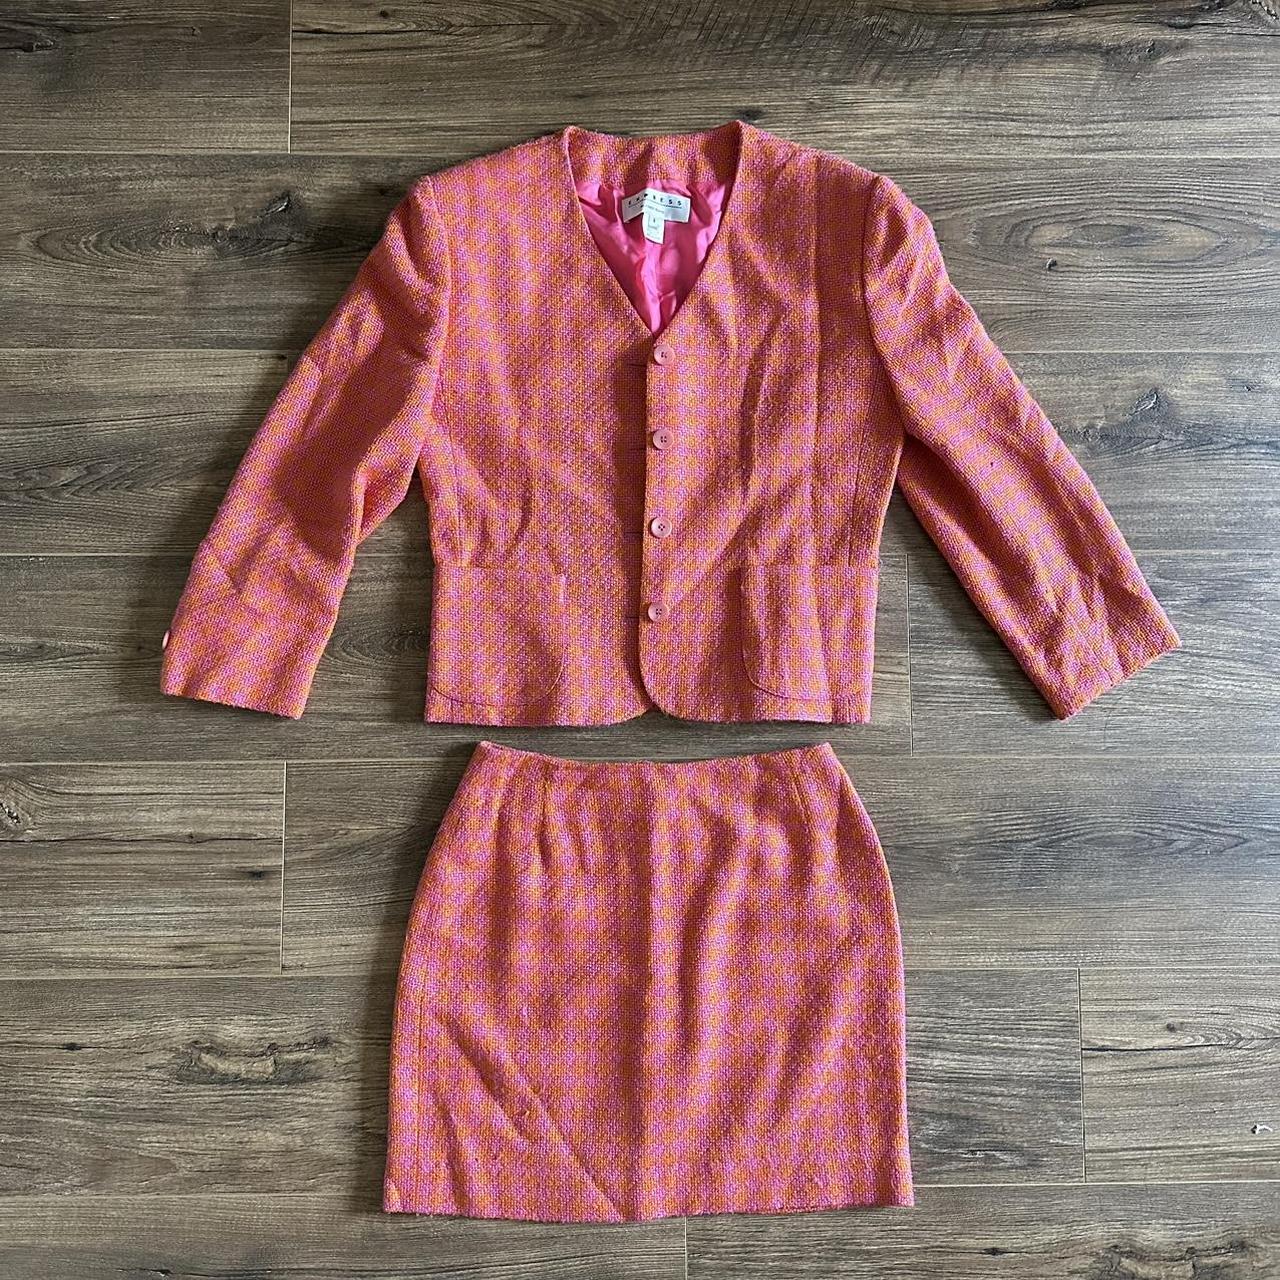 Alfred Sung Women's Pink and Orange Suit